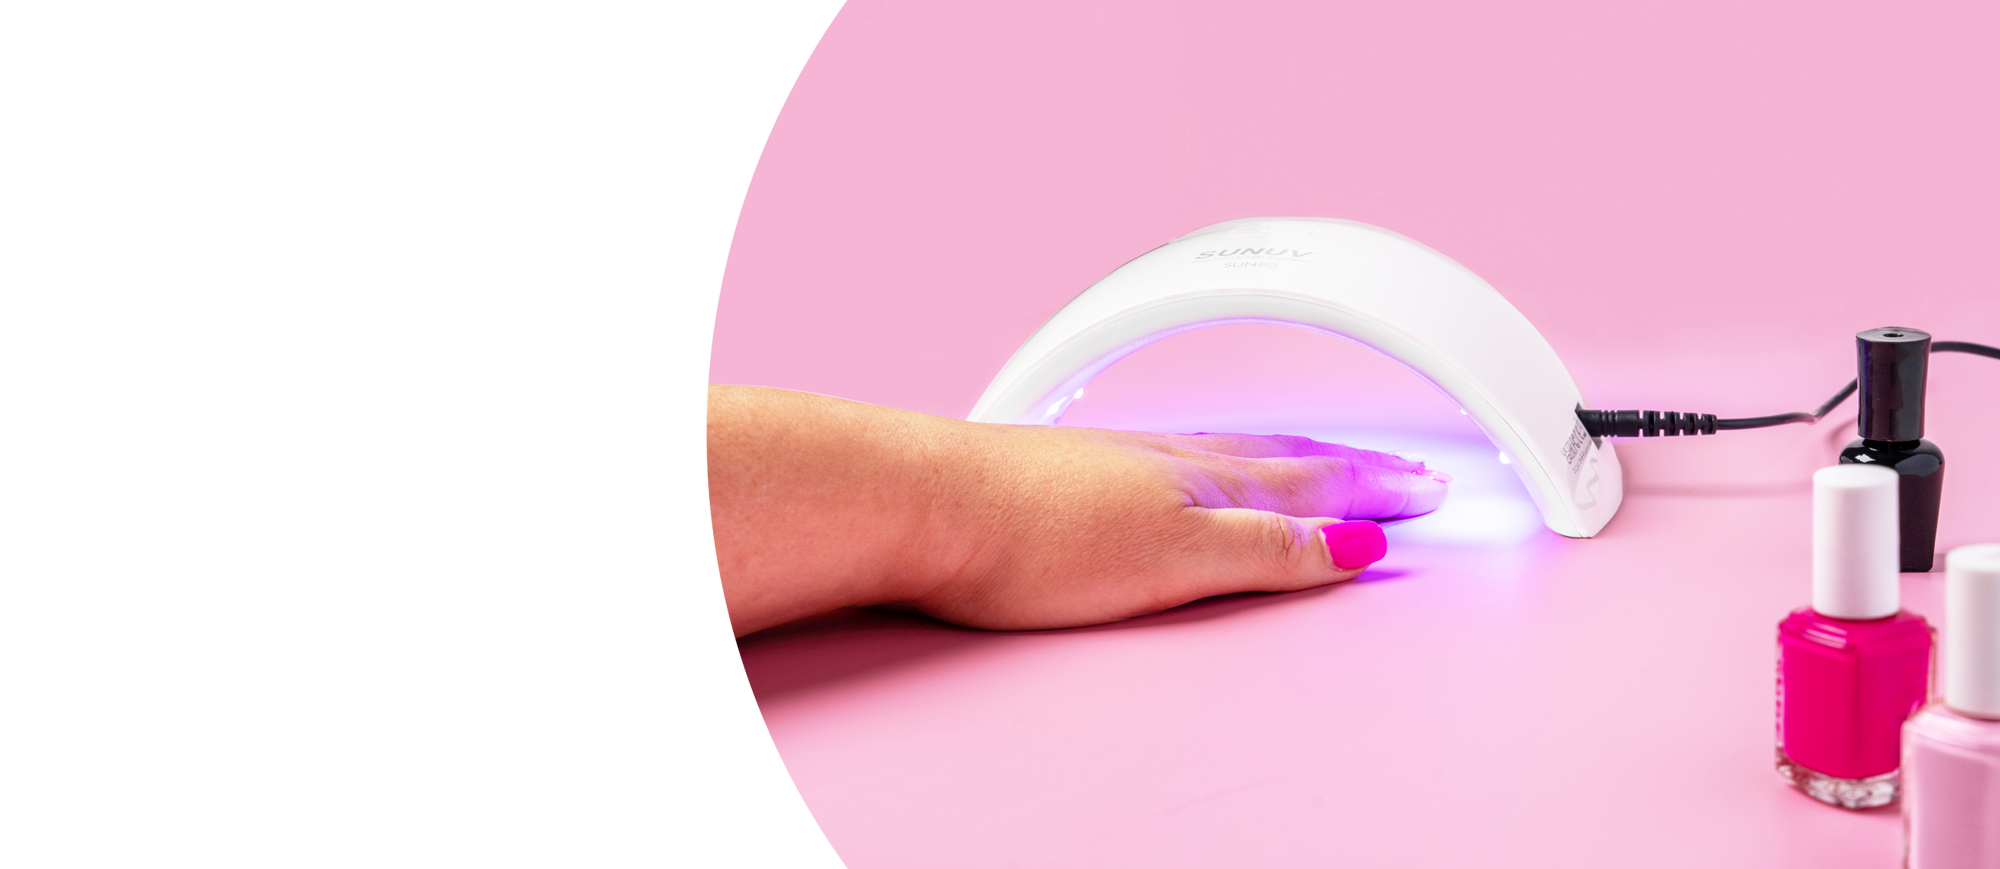 4. UV LED Nail Lamp for Salon Quality Results - wide 8